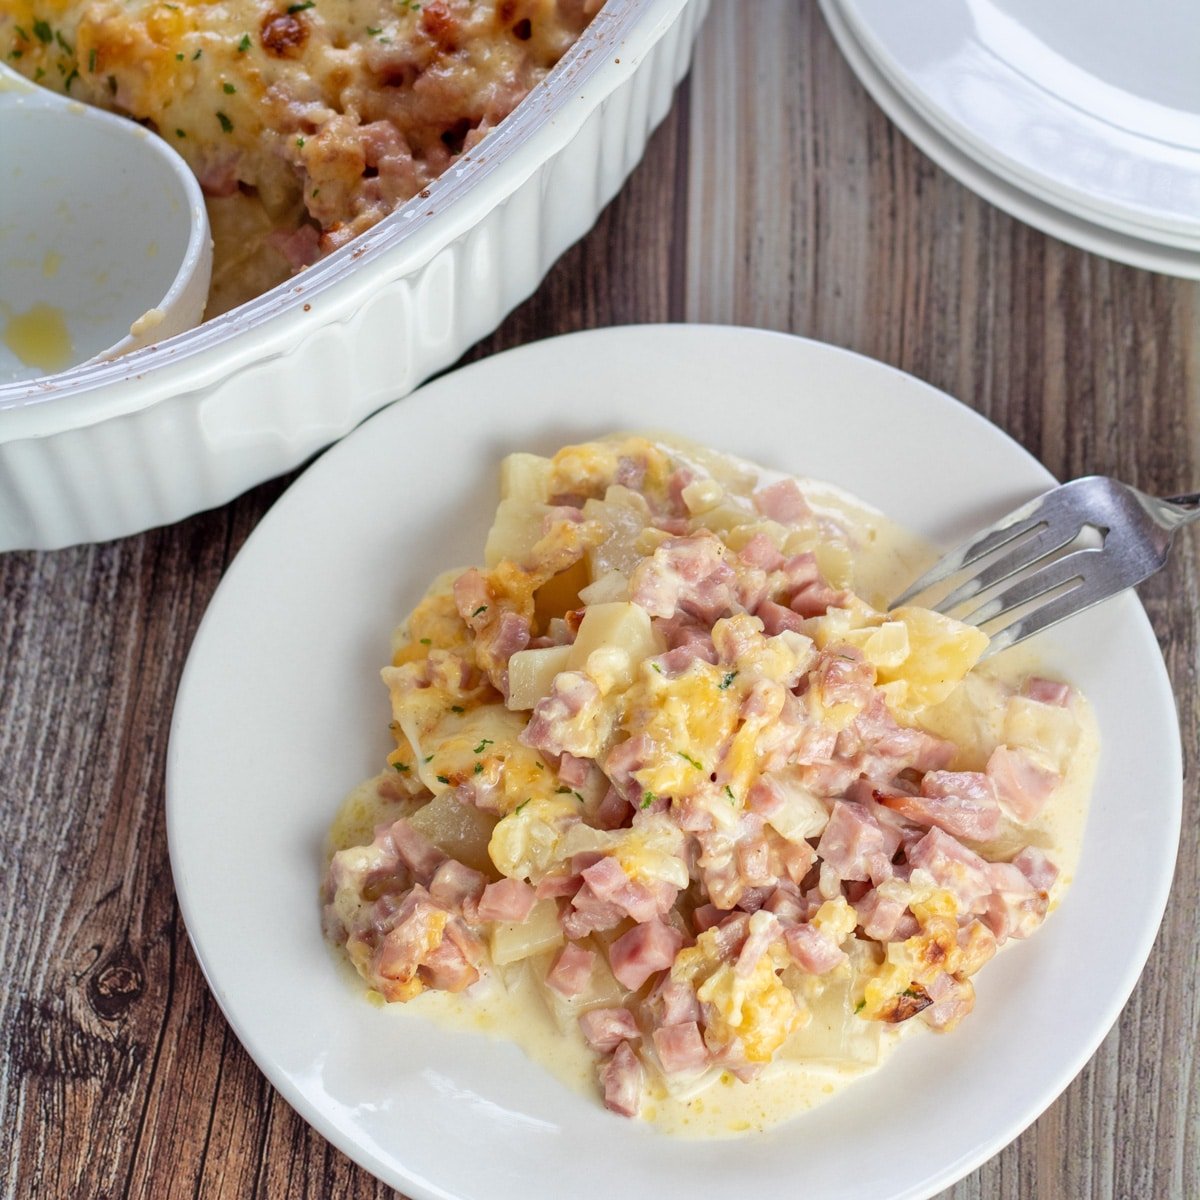 Square overhead image of ham & potato casserole on a white plate, with casserole in background.